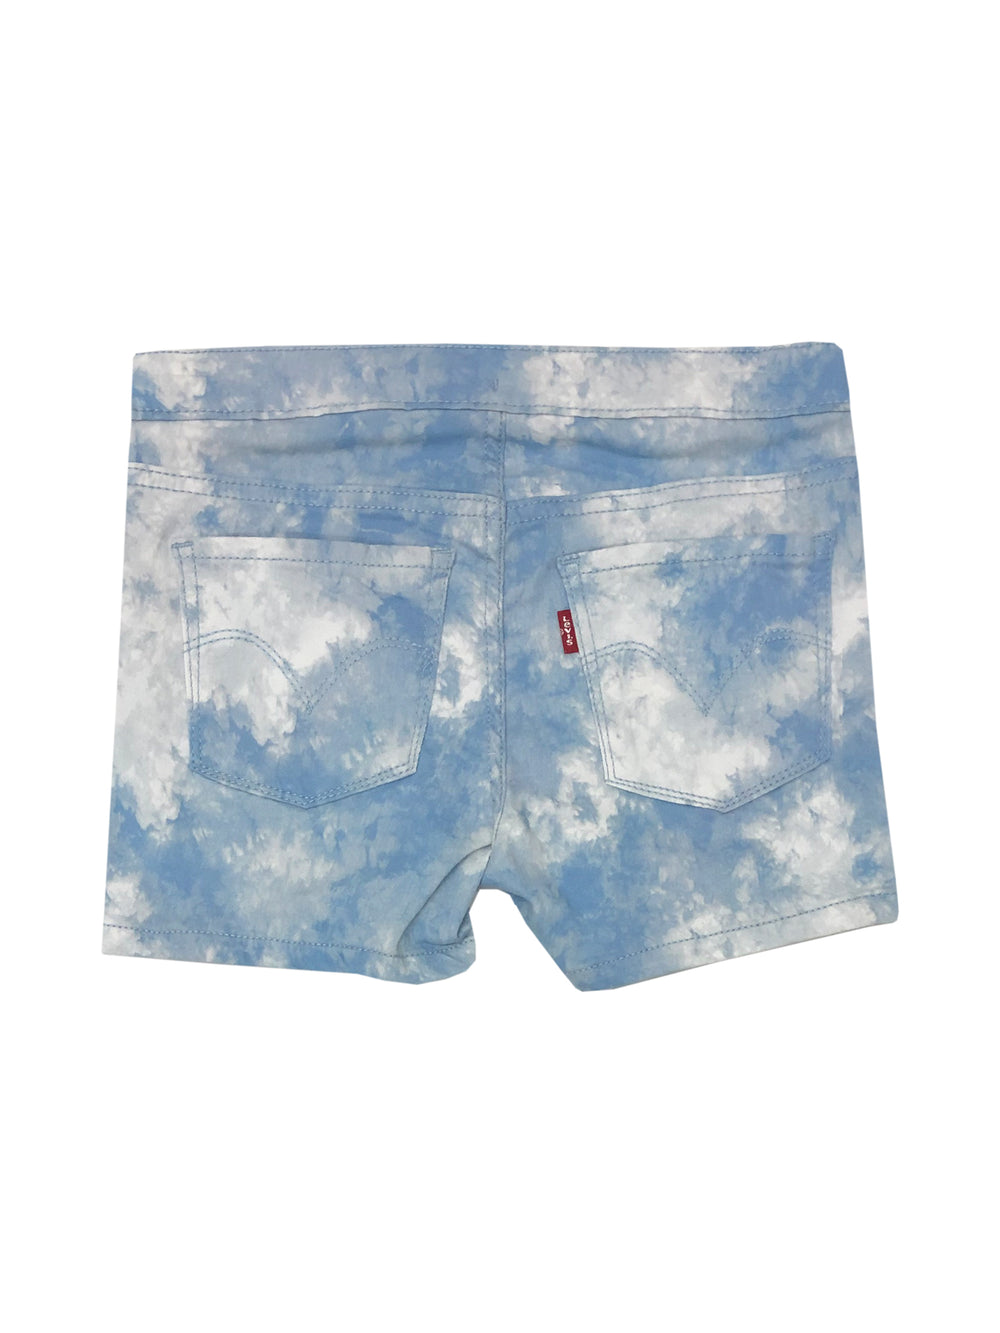 YOUTH GIRLS LEVIS CLOUD WASH PULL ON SHORTS - CLEARANCE